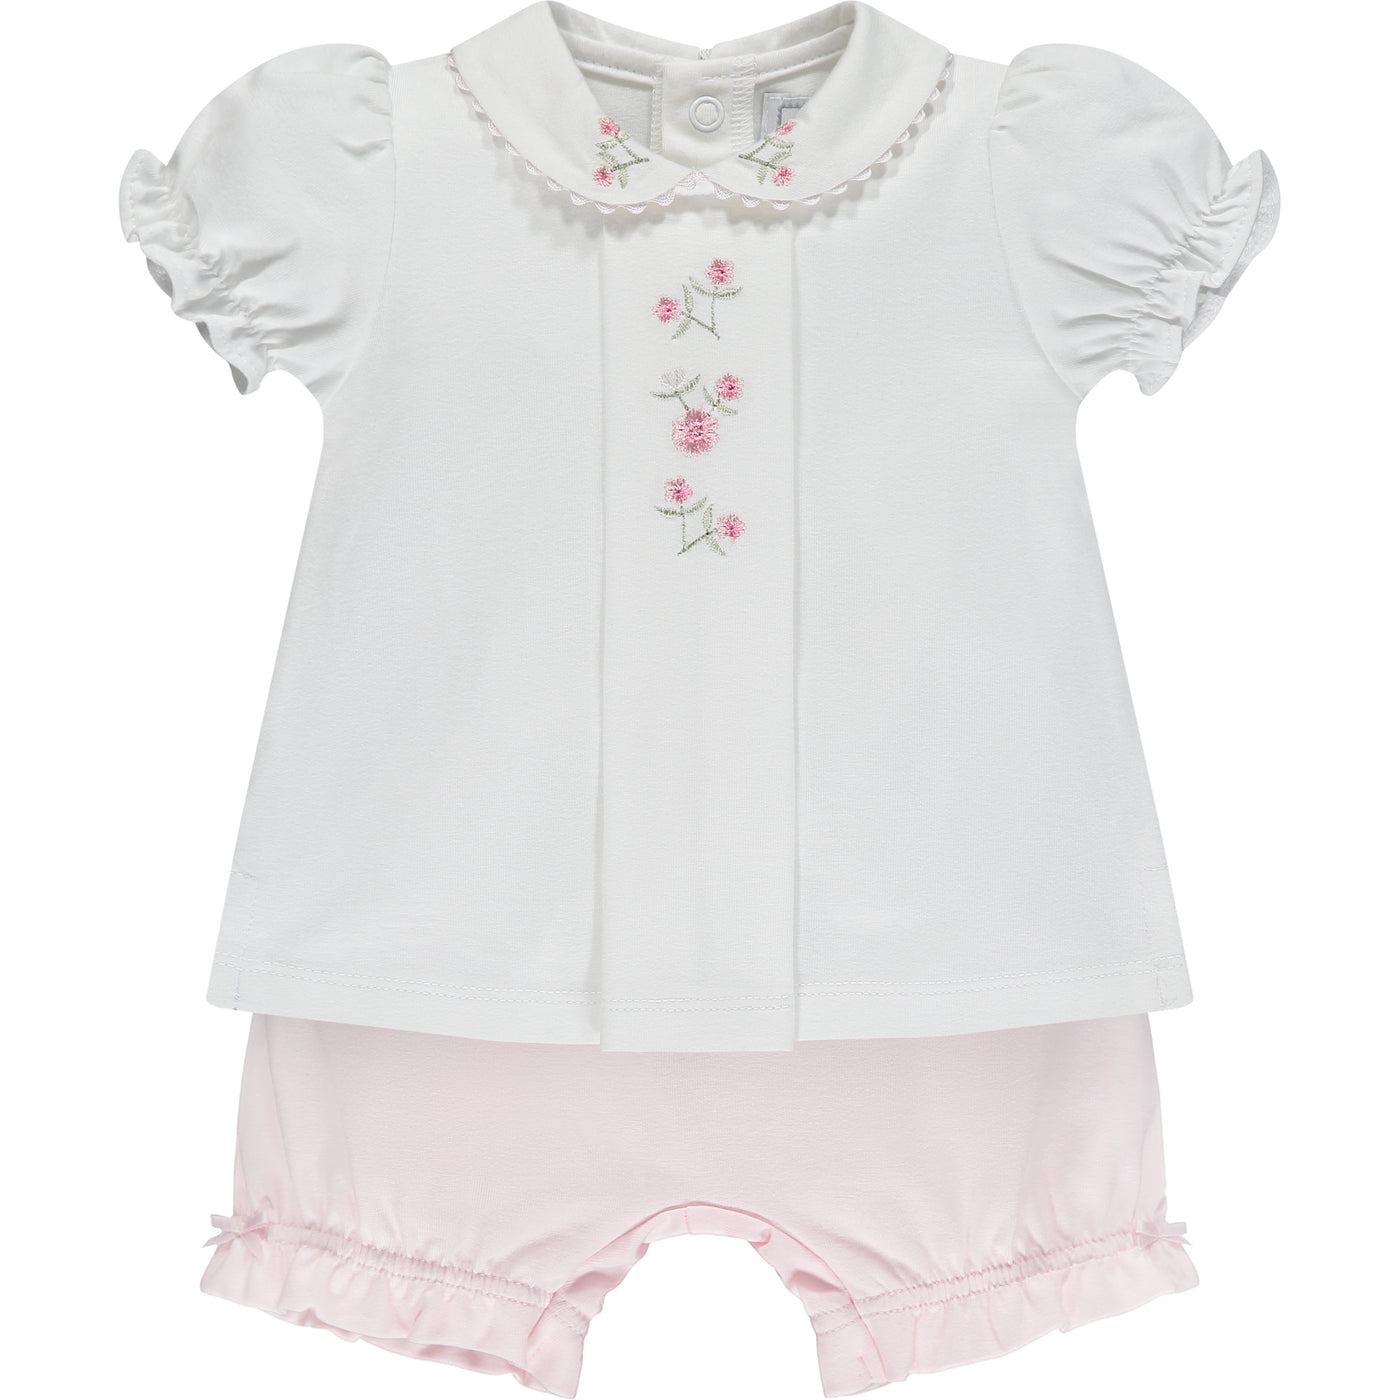 Delores Baby Girls Top & Bloomers Set